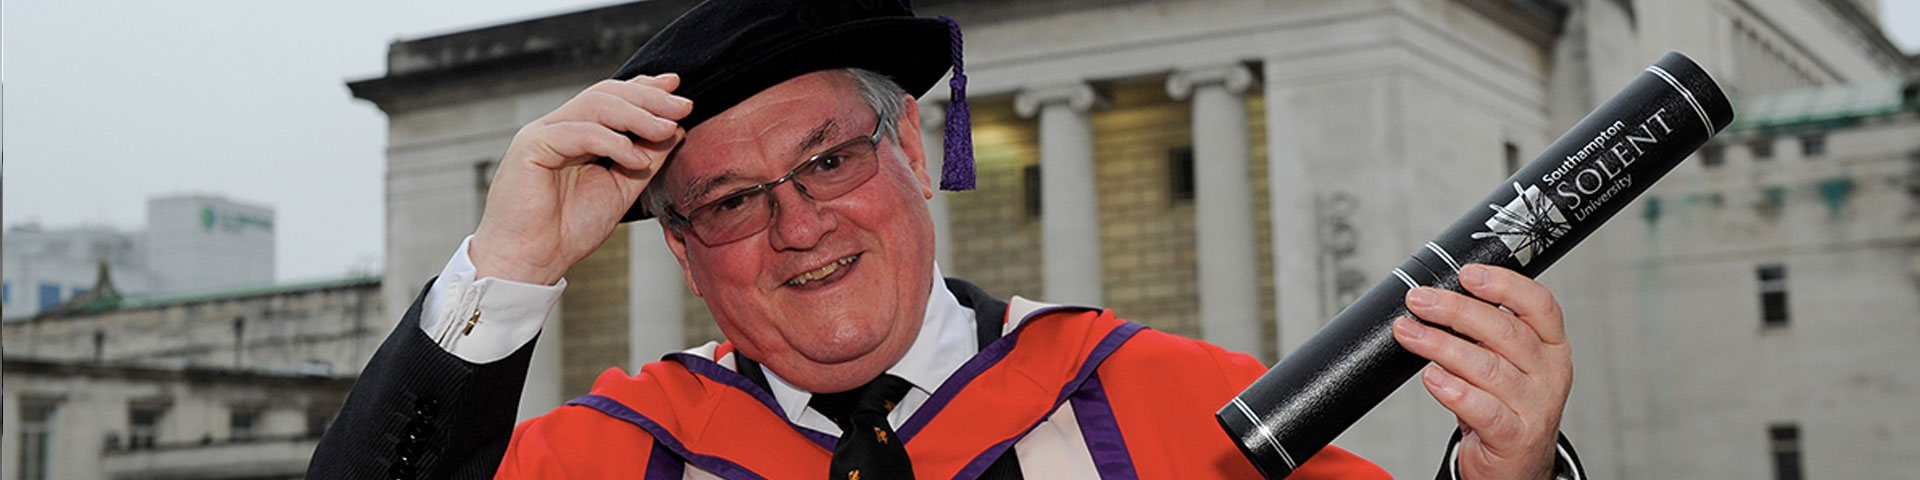 Doug Barrow with his honorary degree outside the Guildhall in Southampton